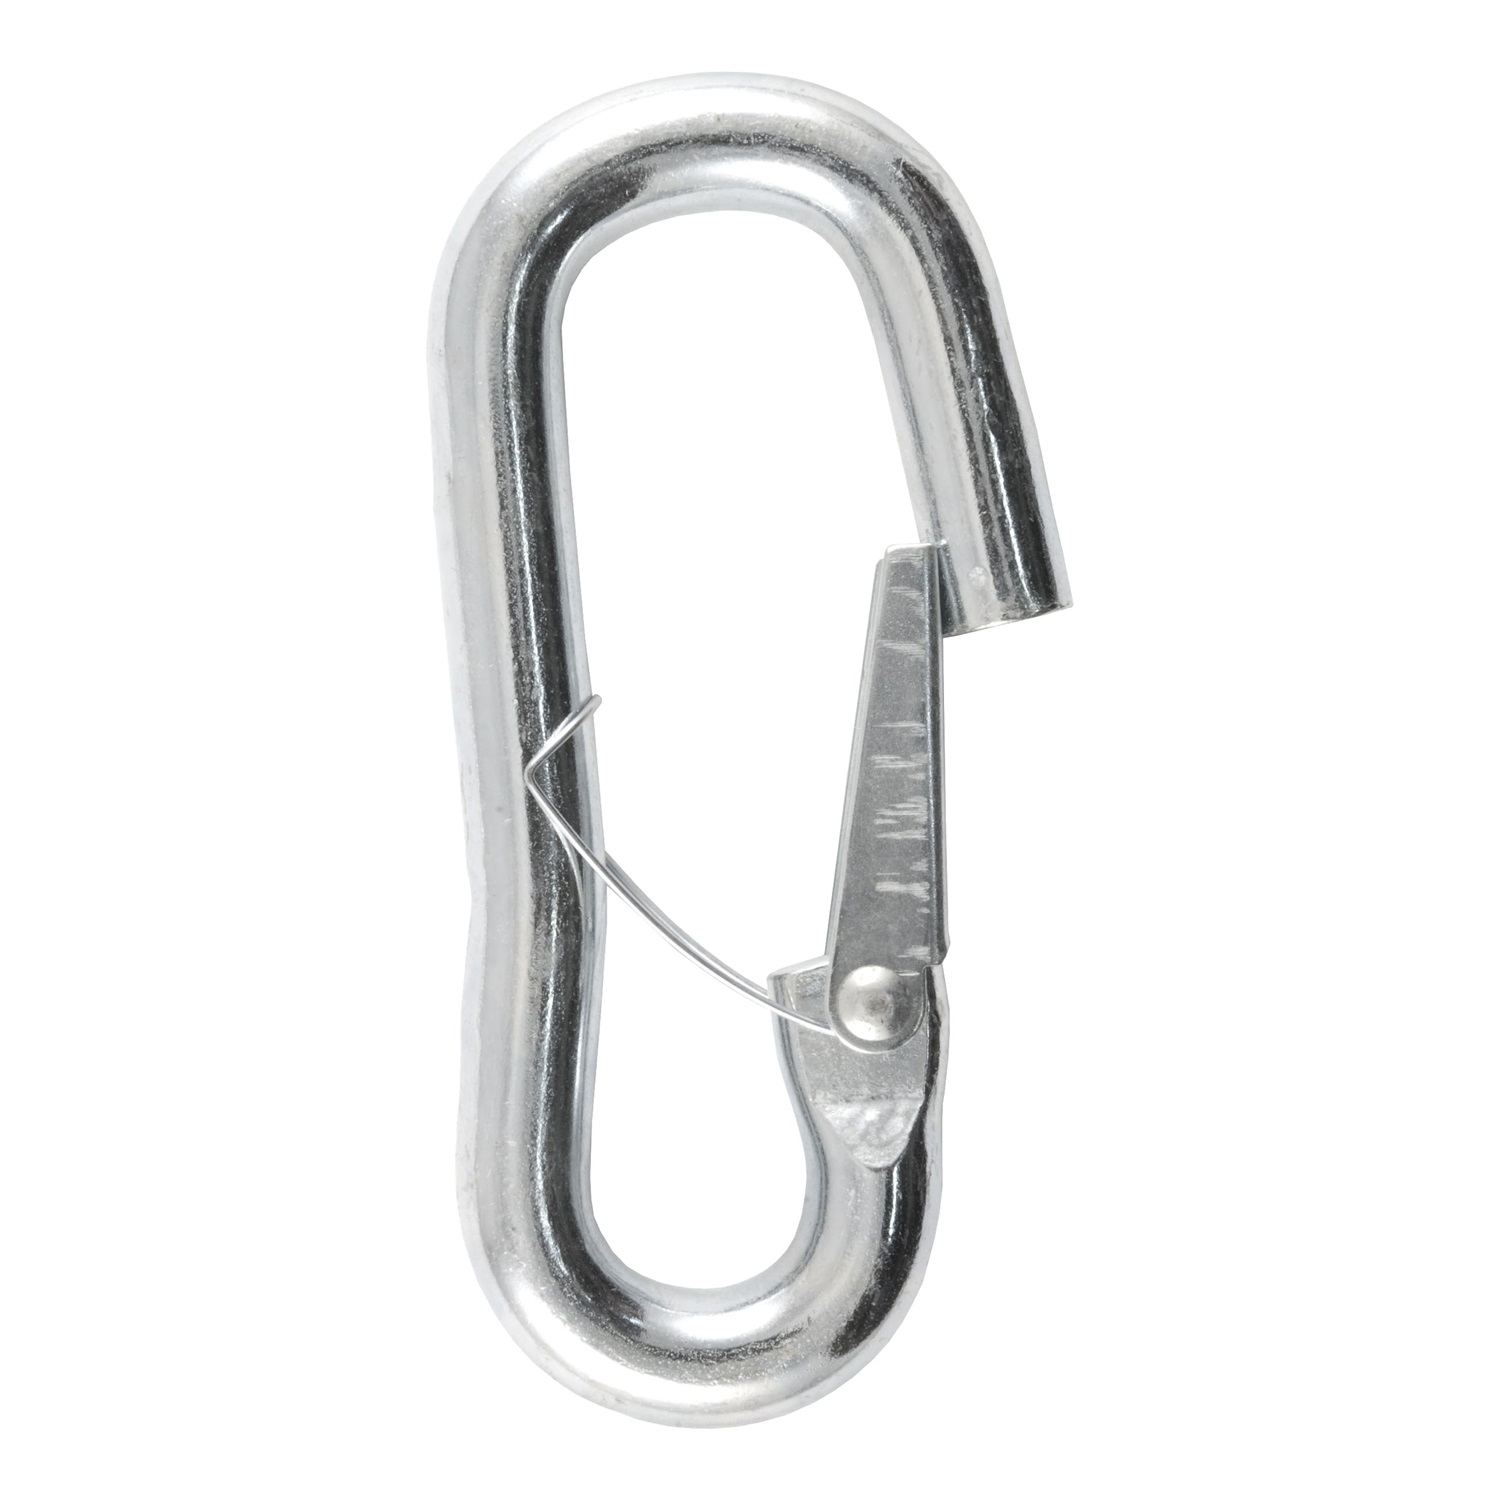 CURT Manufacturing CURT Manufacturing 81288 Class III; S-Hook w/Safety Latch  Fits